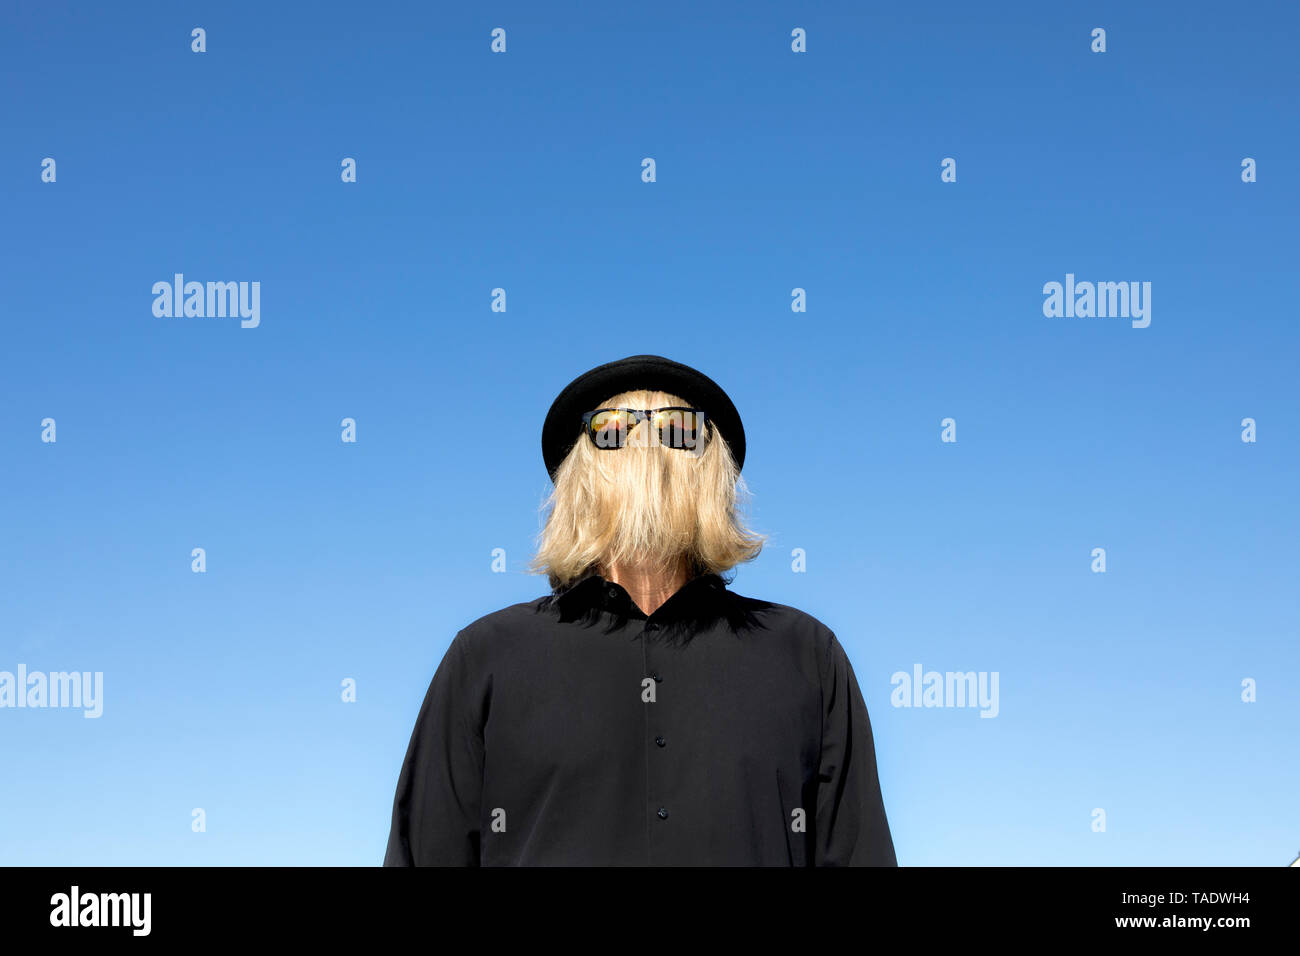 Blond hair covering man's face wearing sunglasses and bowler hat Stock Photo